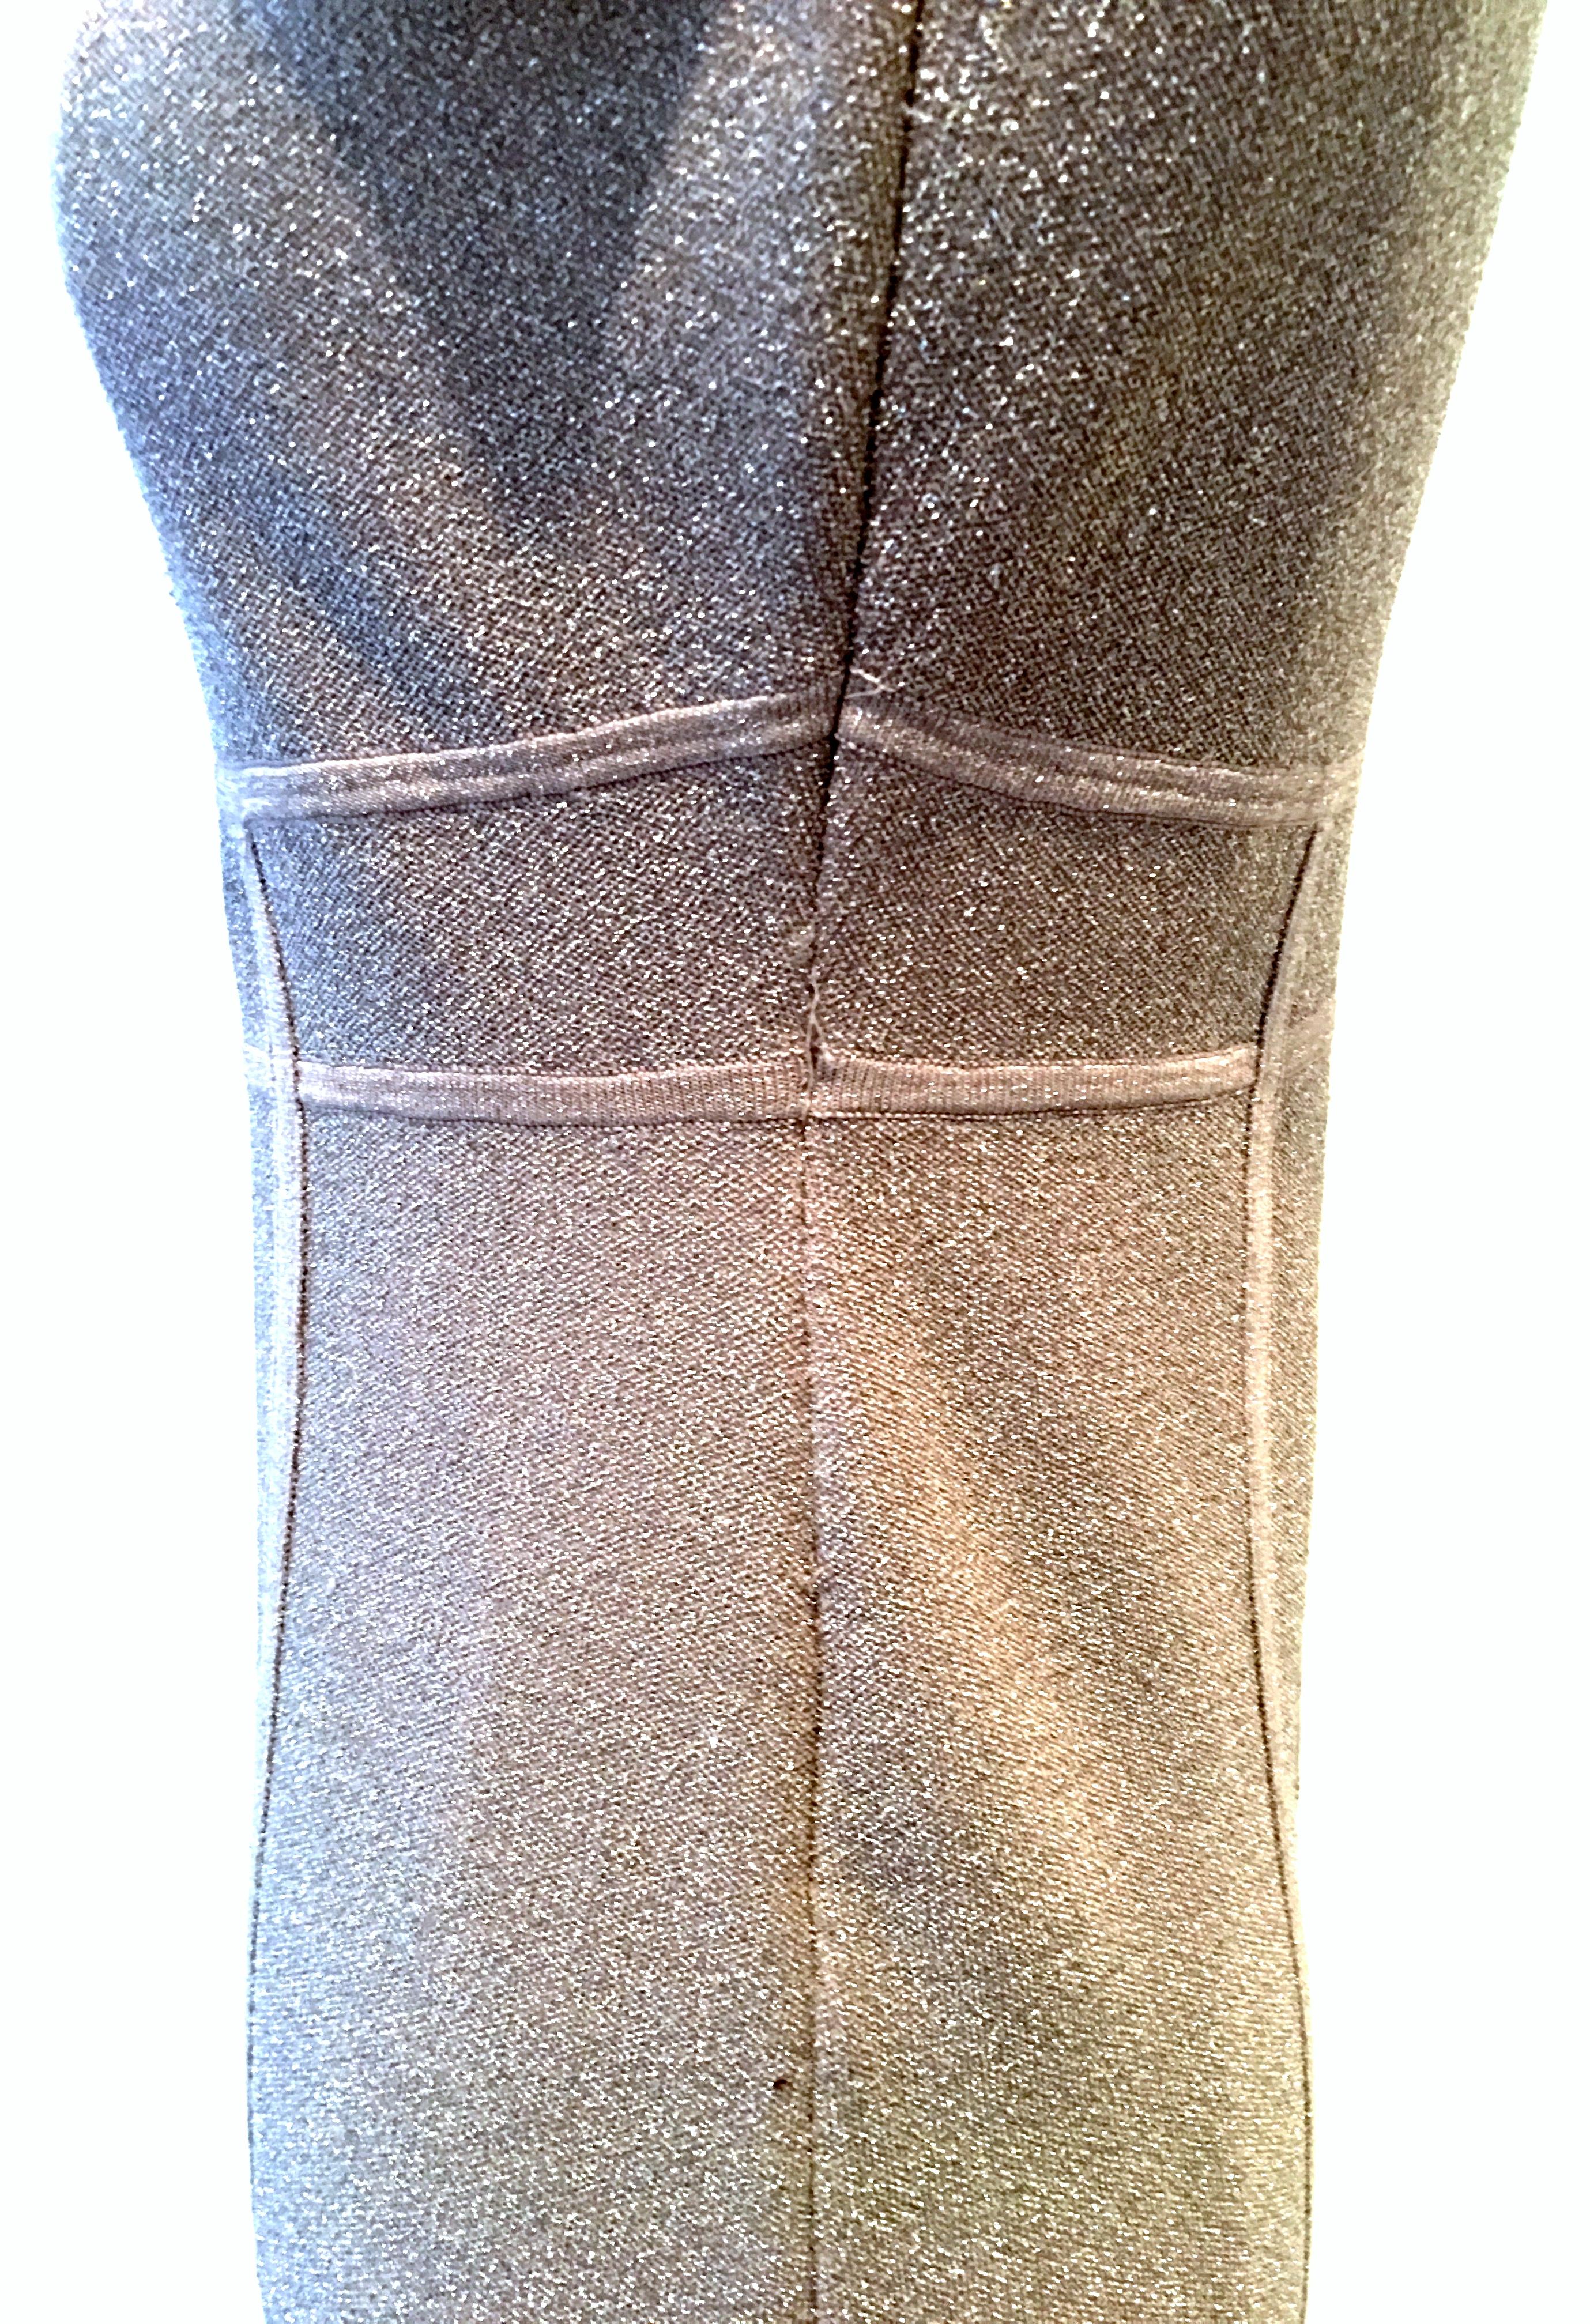 21st Century Herve Leger Style Metallic Cocktail Dress By Maxazria For BCBG  In Excellent Condition For Sale In West Palm Beach, FL